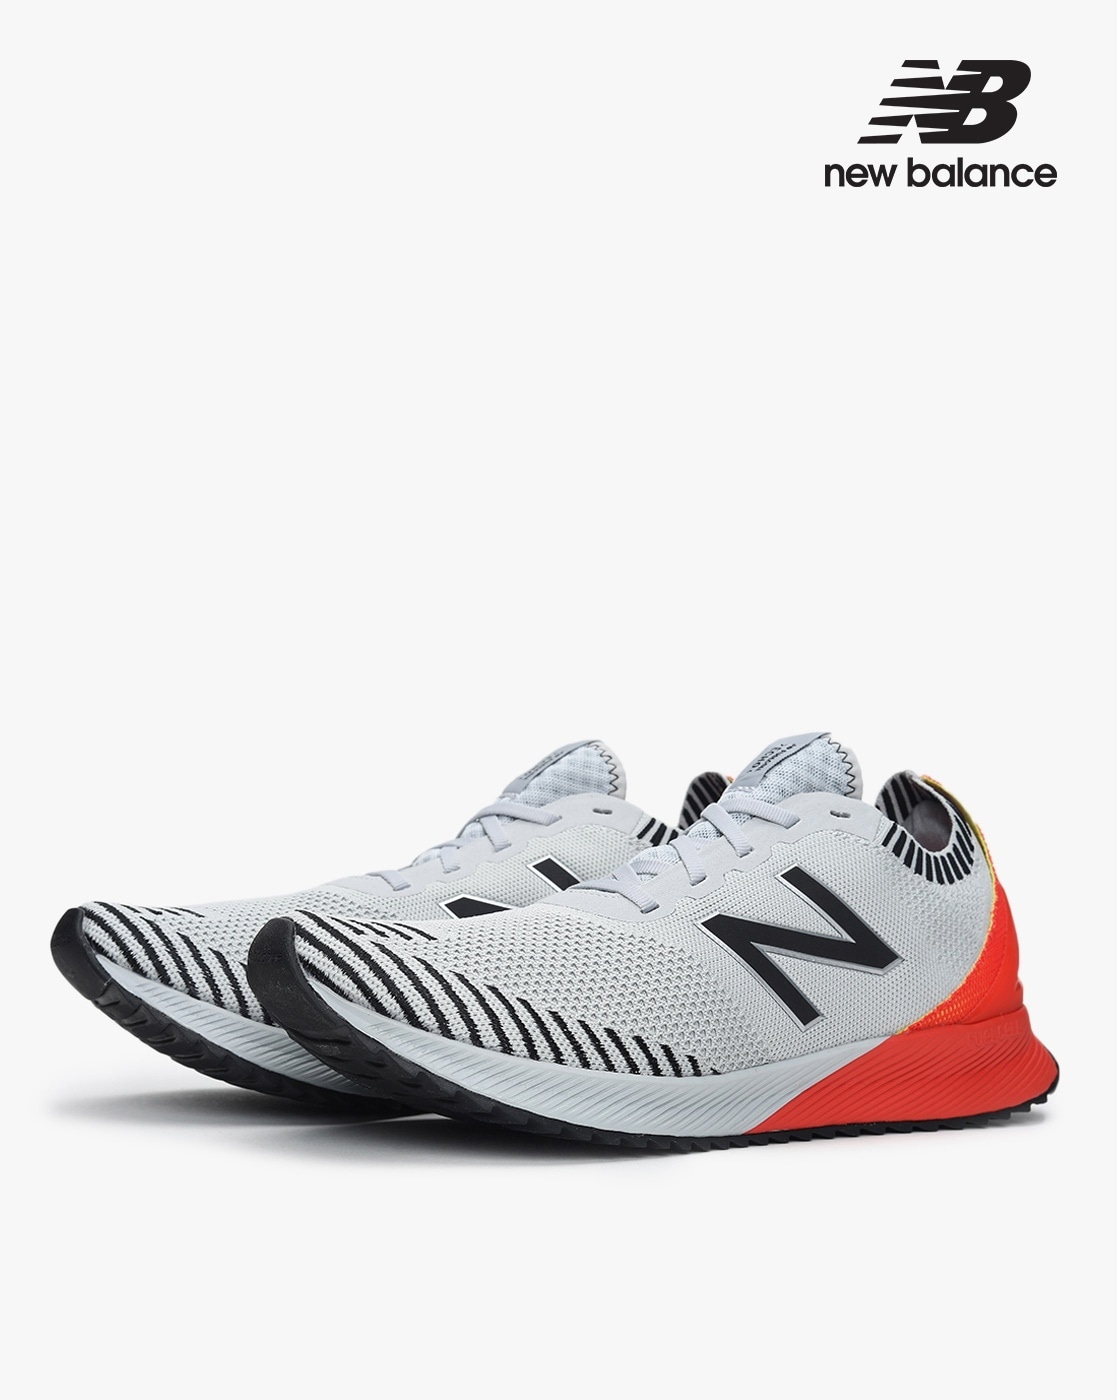 where to purchase new balance shoes